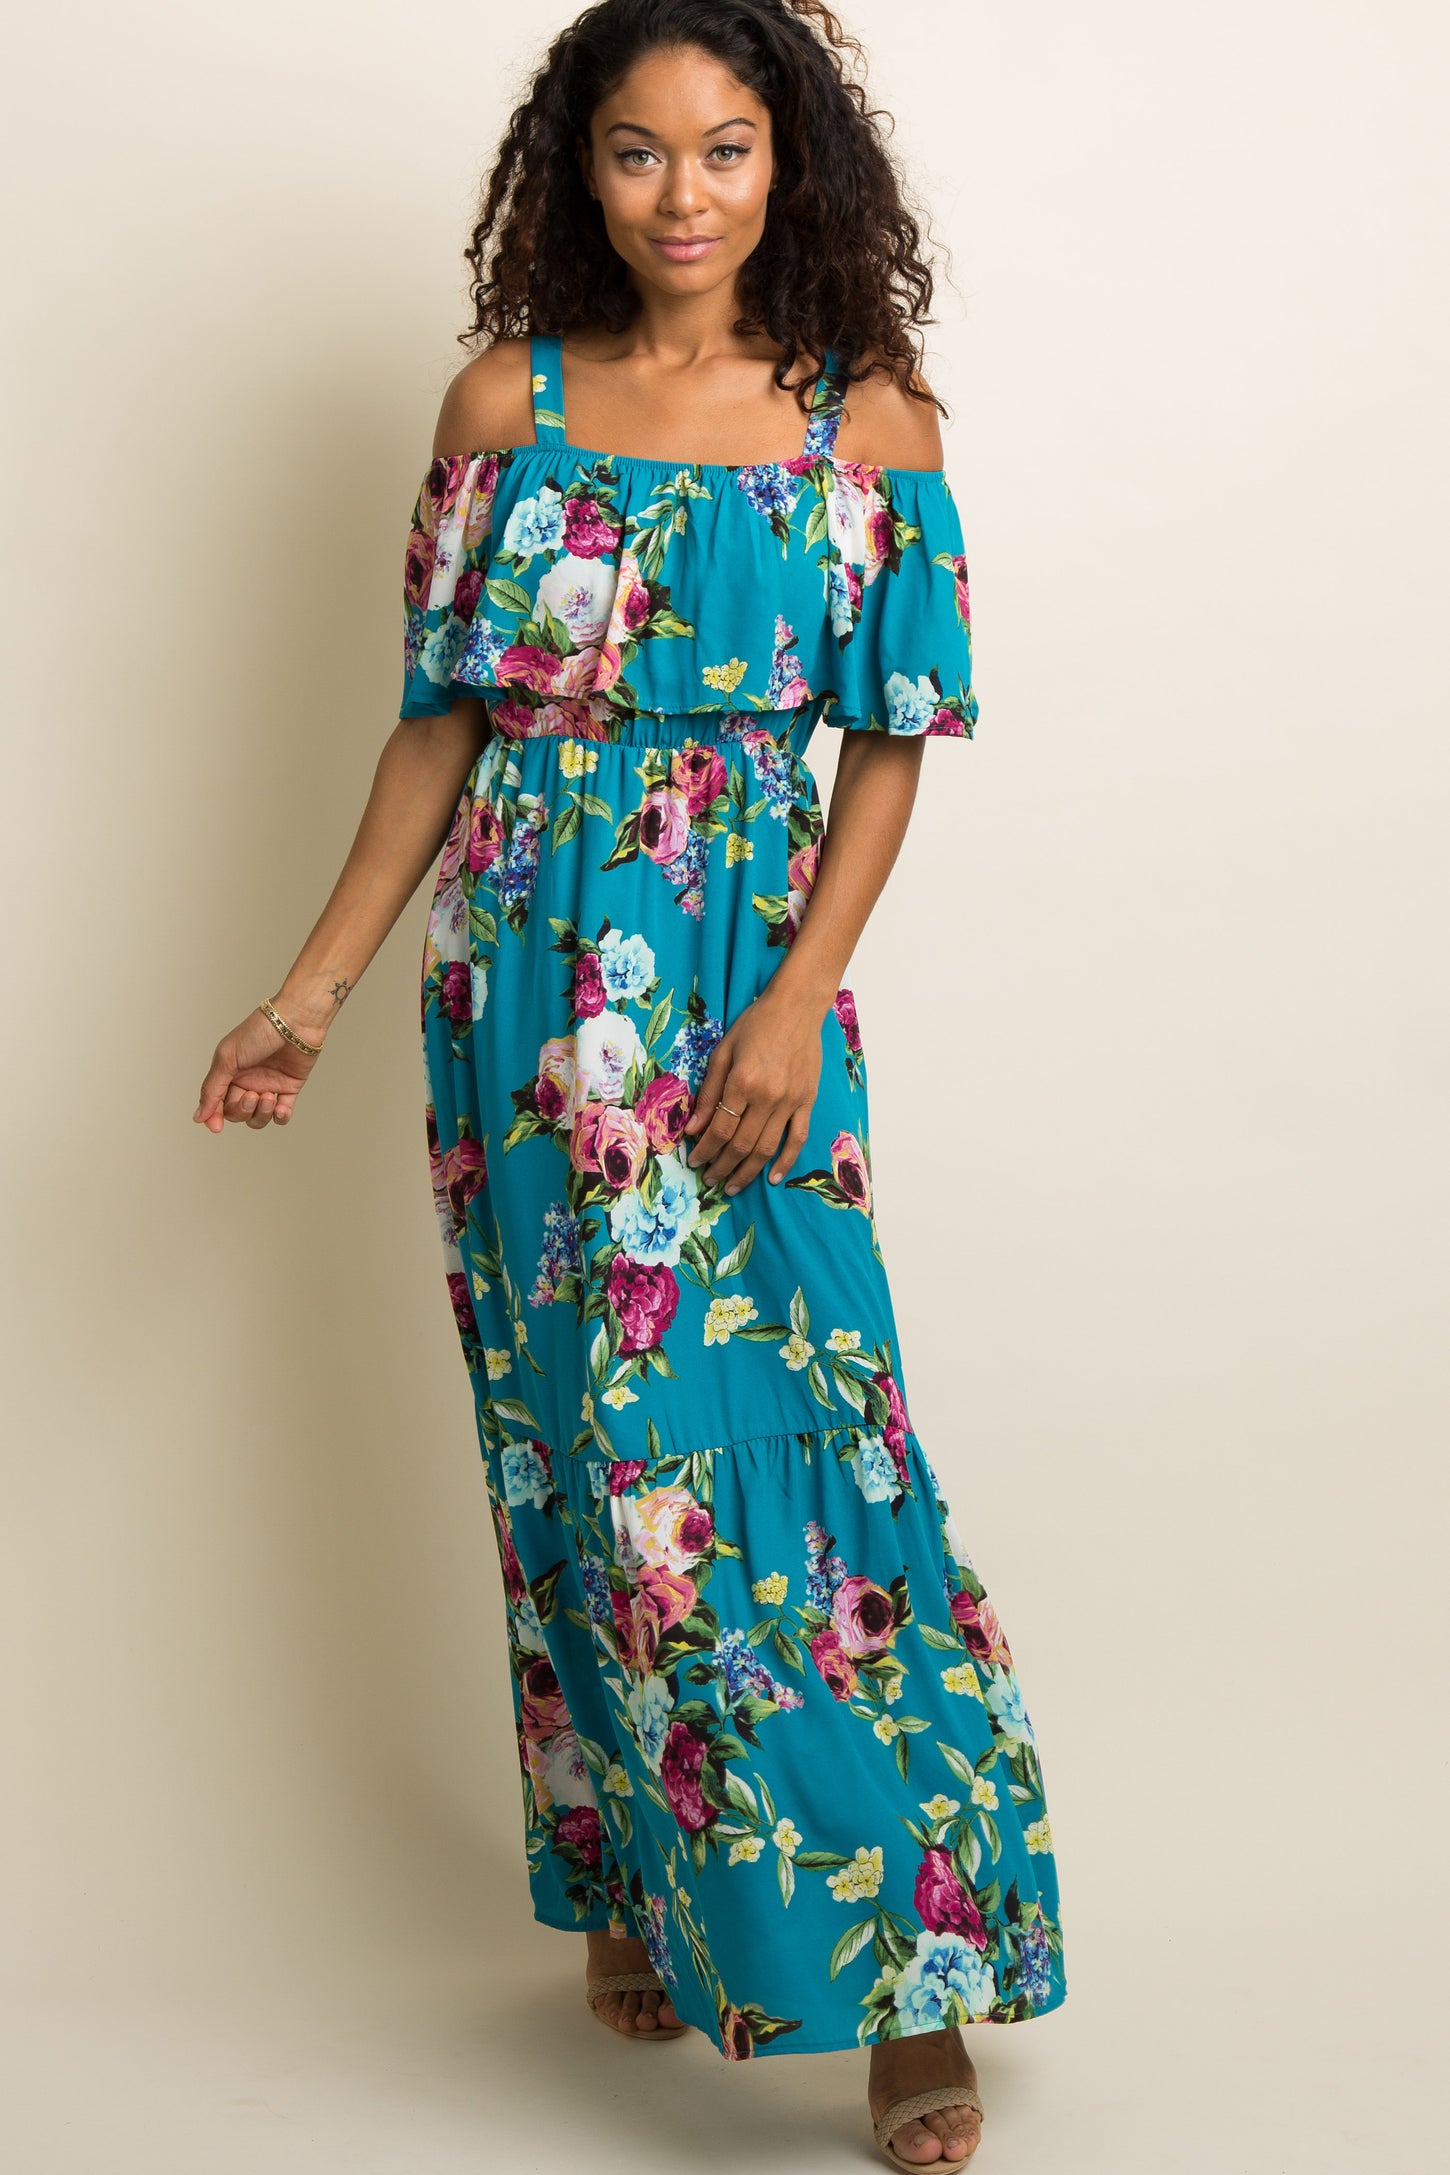 PinkBlush Teal Floral Ruffle Open Shoulder Maternity Maxi Dress